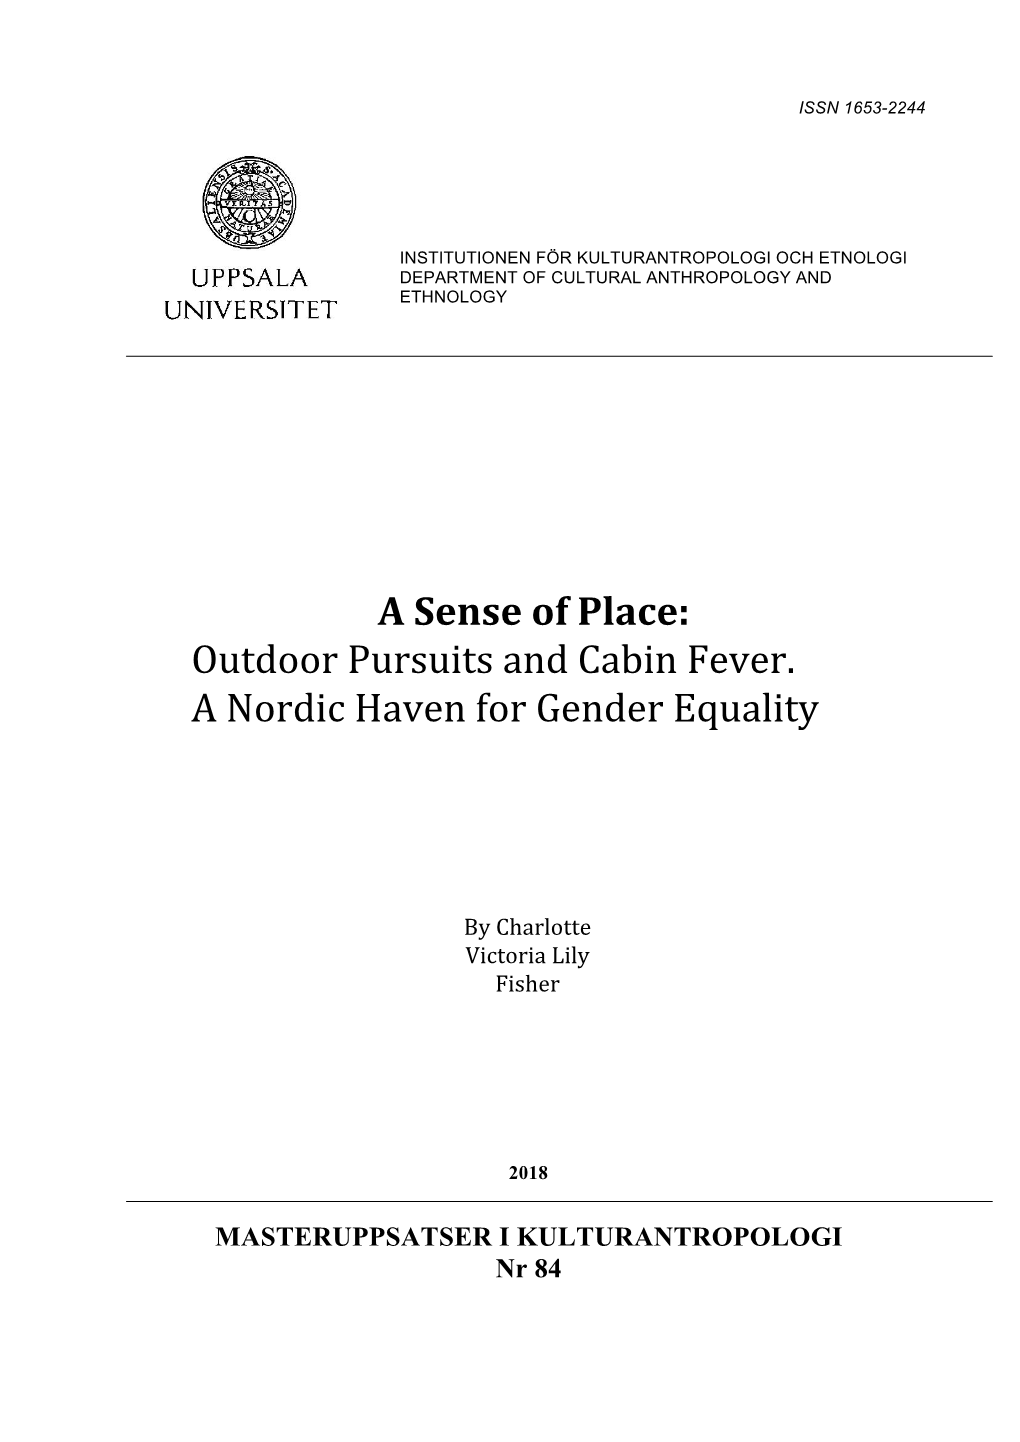 A Sense of Place: Outdoor Pursuits and Cabin Fever. a Nordic Haven for Gender Equality